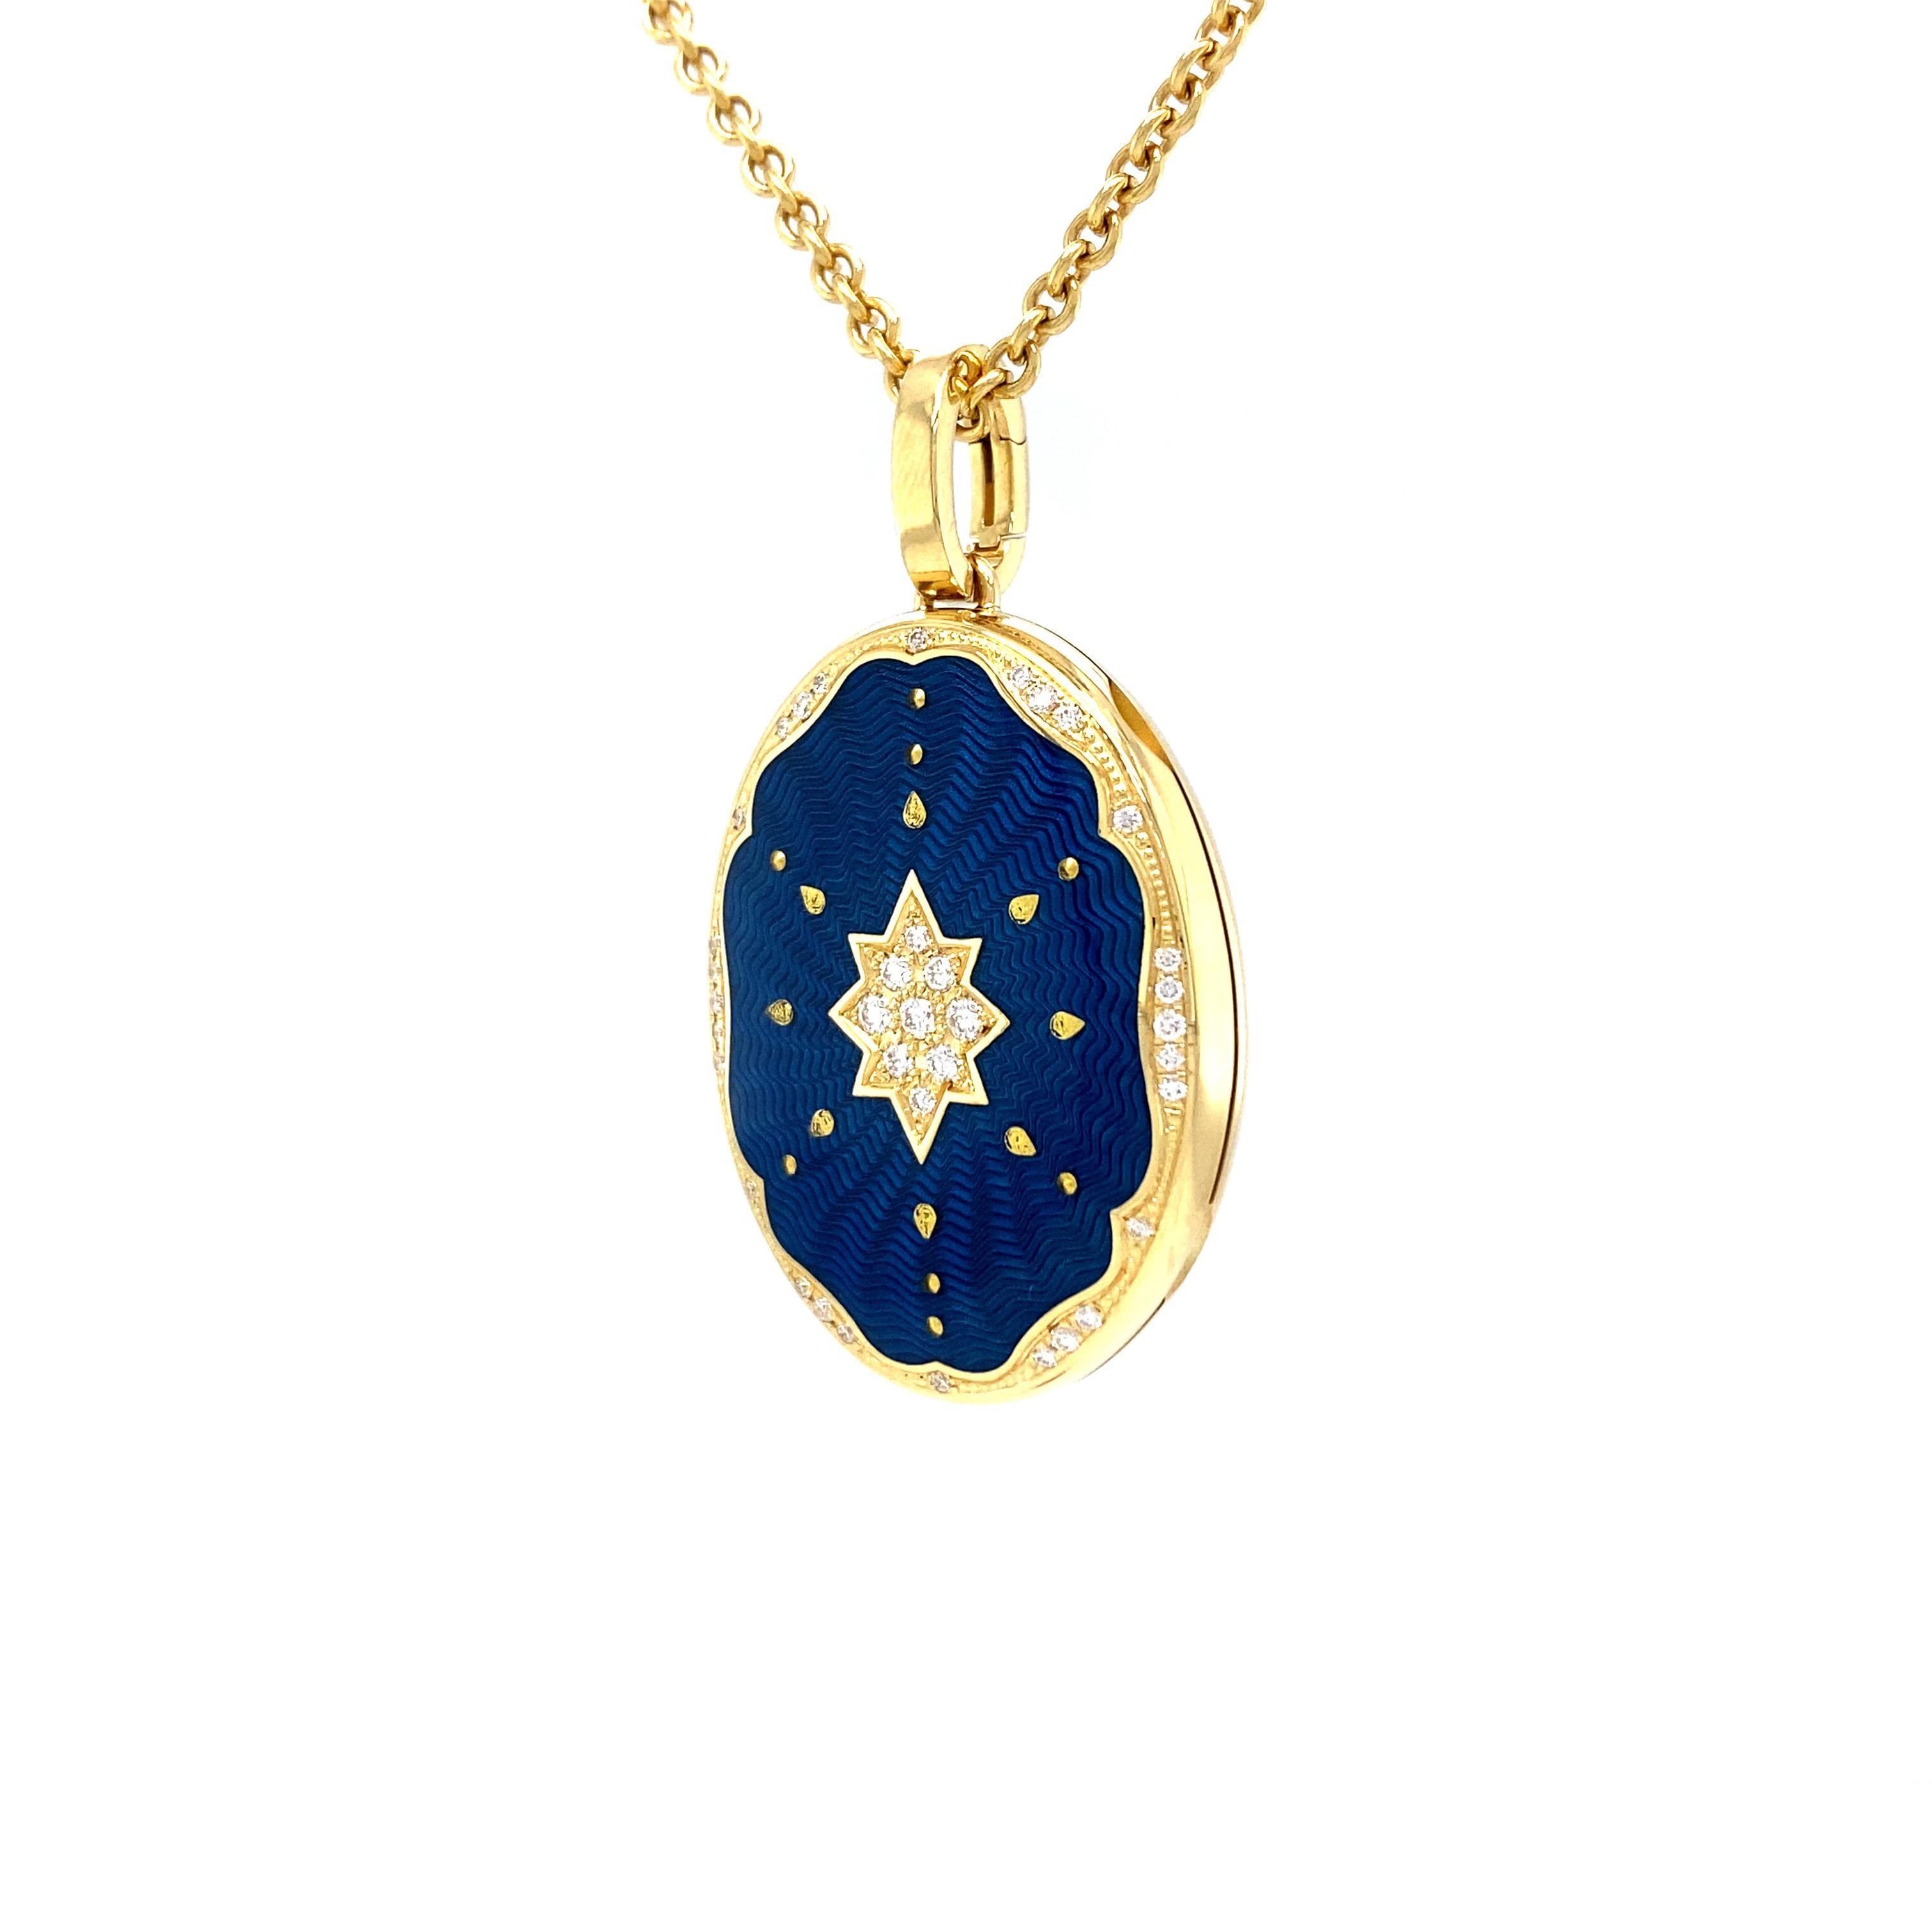 Victor Mayer oval pendant locket necklace 18k yellow gold, Victoria collection, peacock blue vitreous enamel, gold paillons, 37 diamonds, total 0.29 ct, G VS, brilliant cut, measurements app. 25 mm x 35 mm

About the creator Victor Mayer
Victor